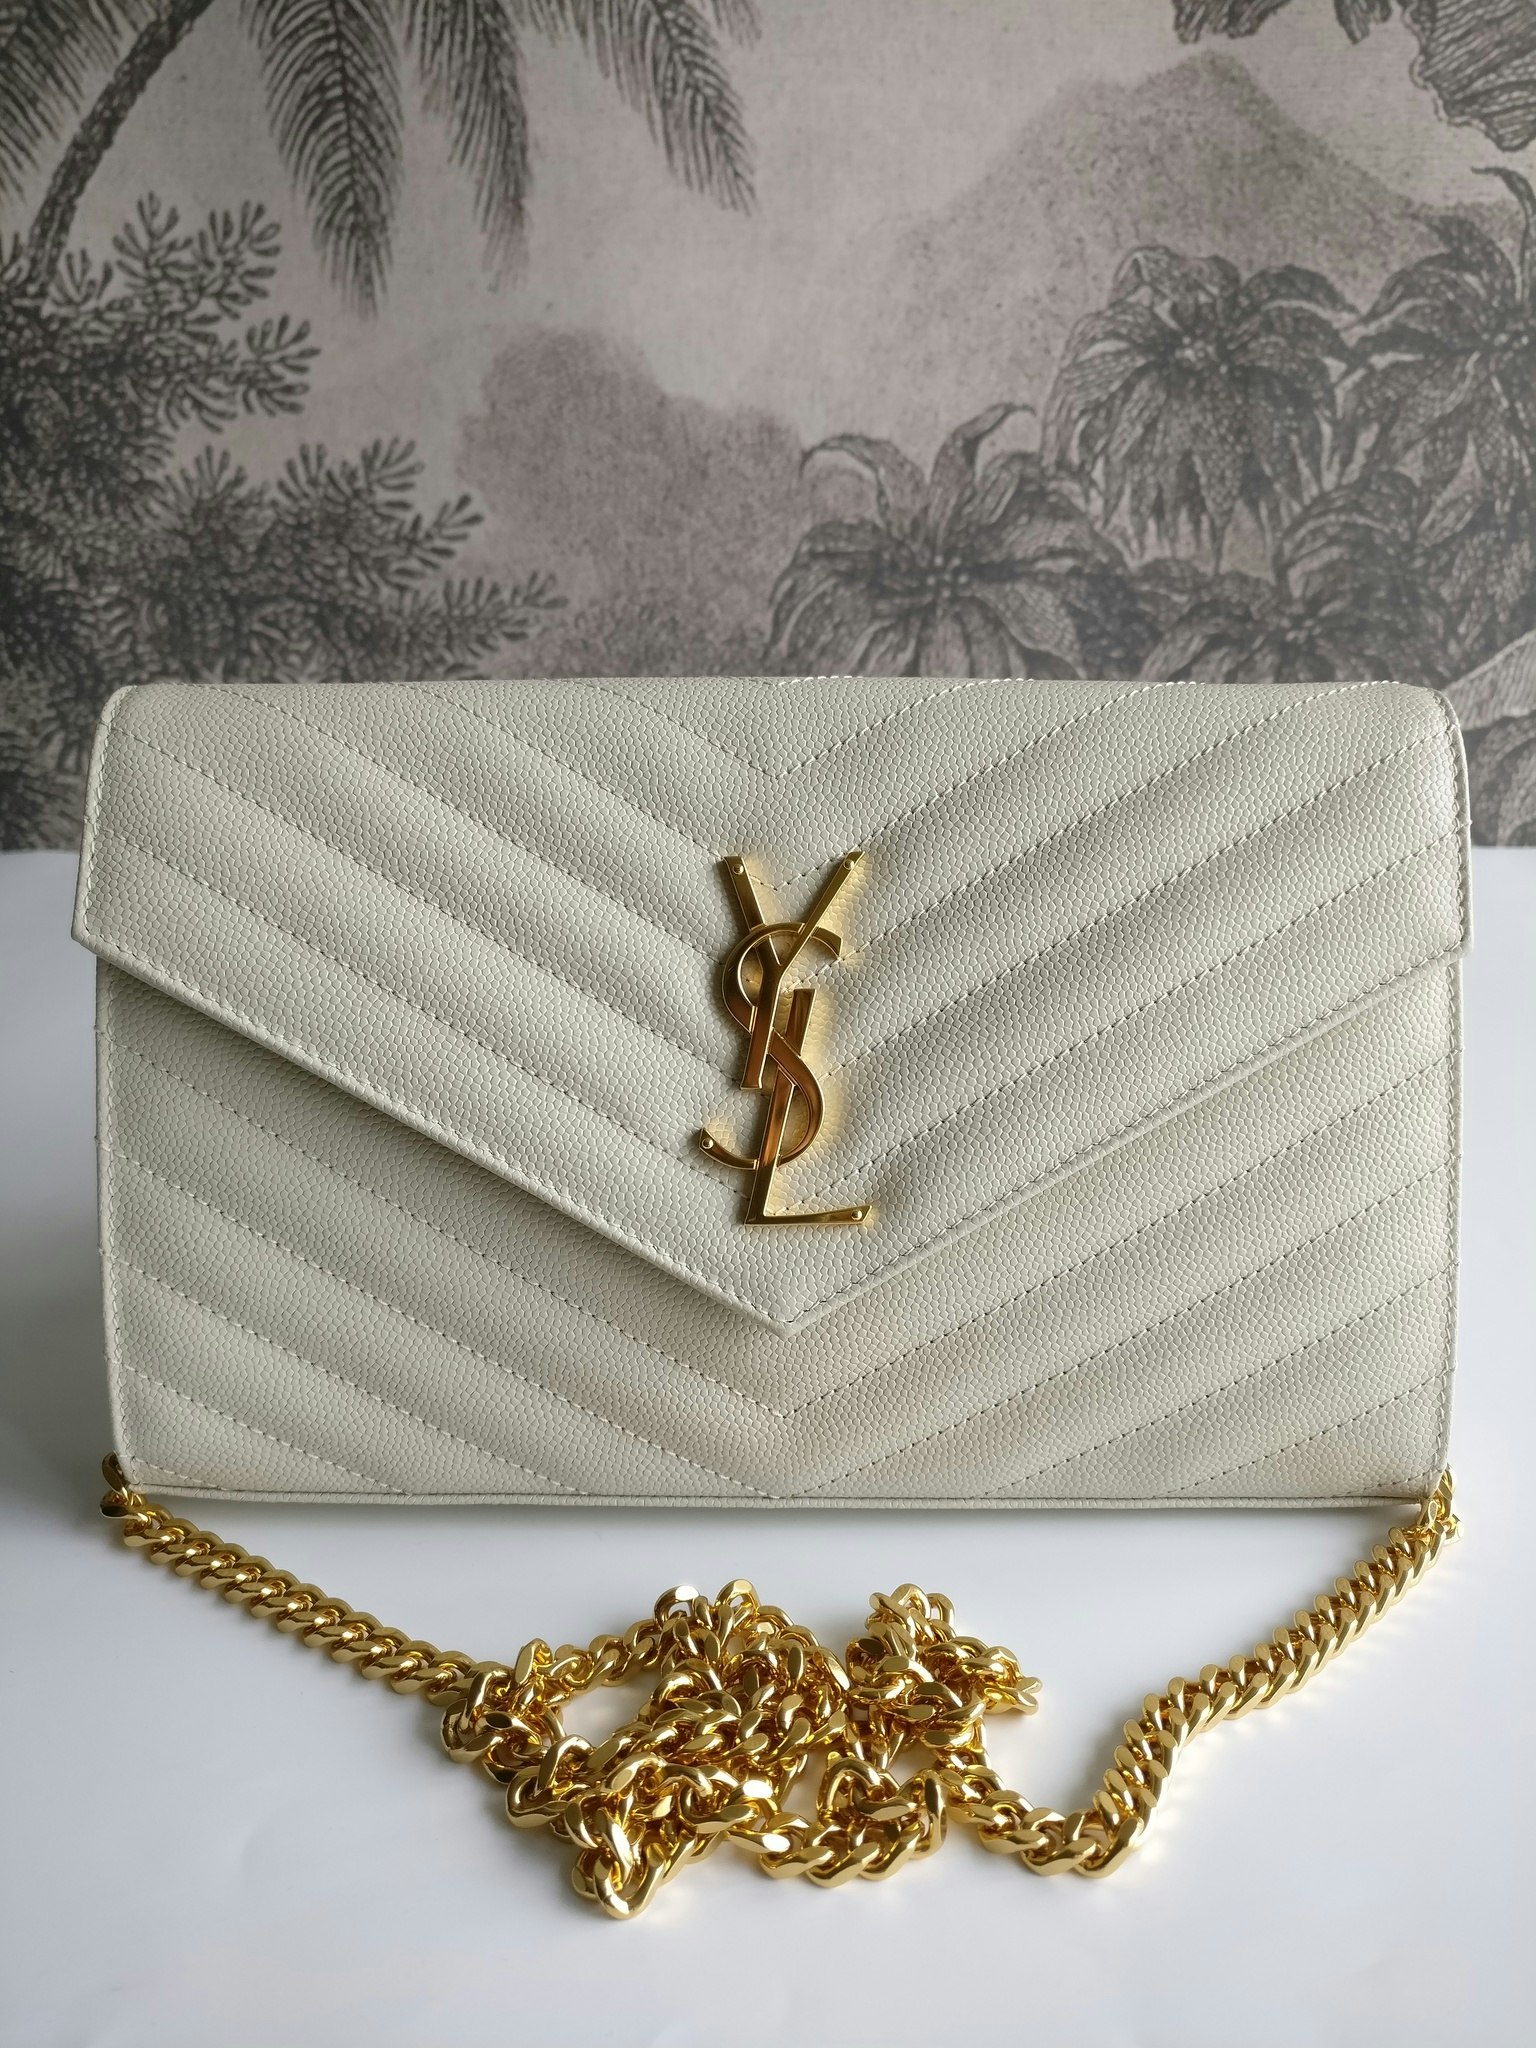 Ysl Wallet On Chain